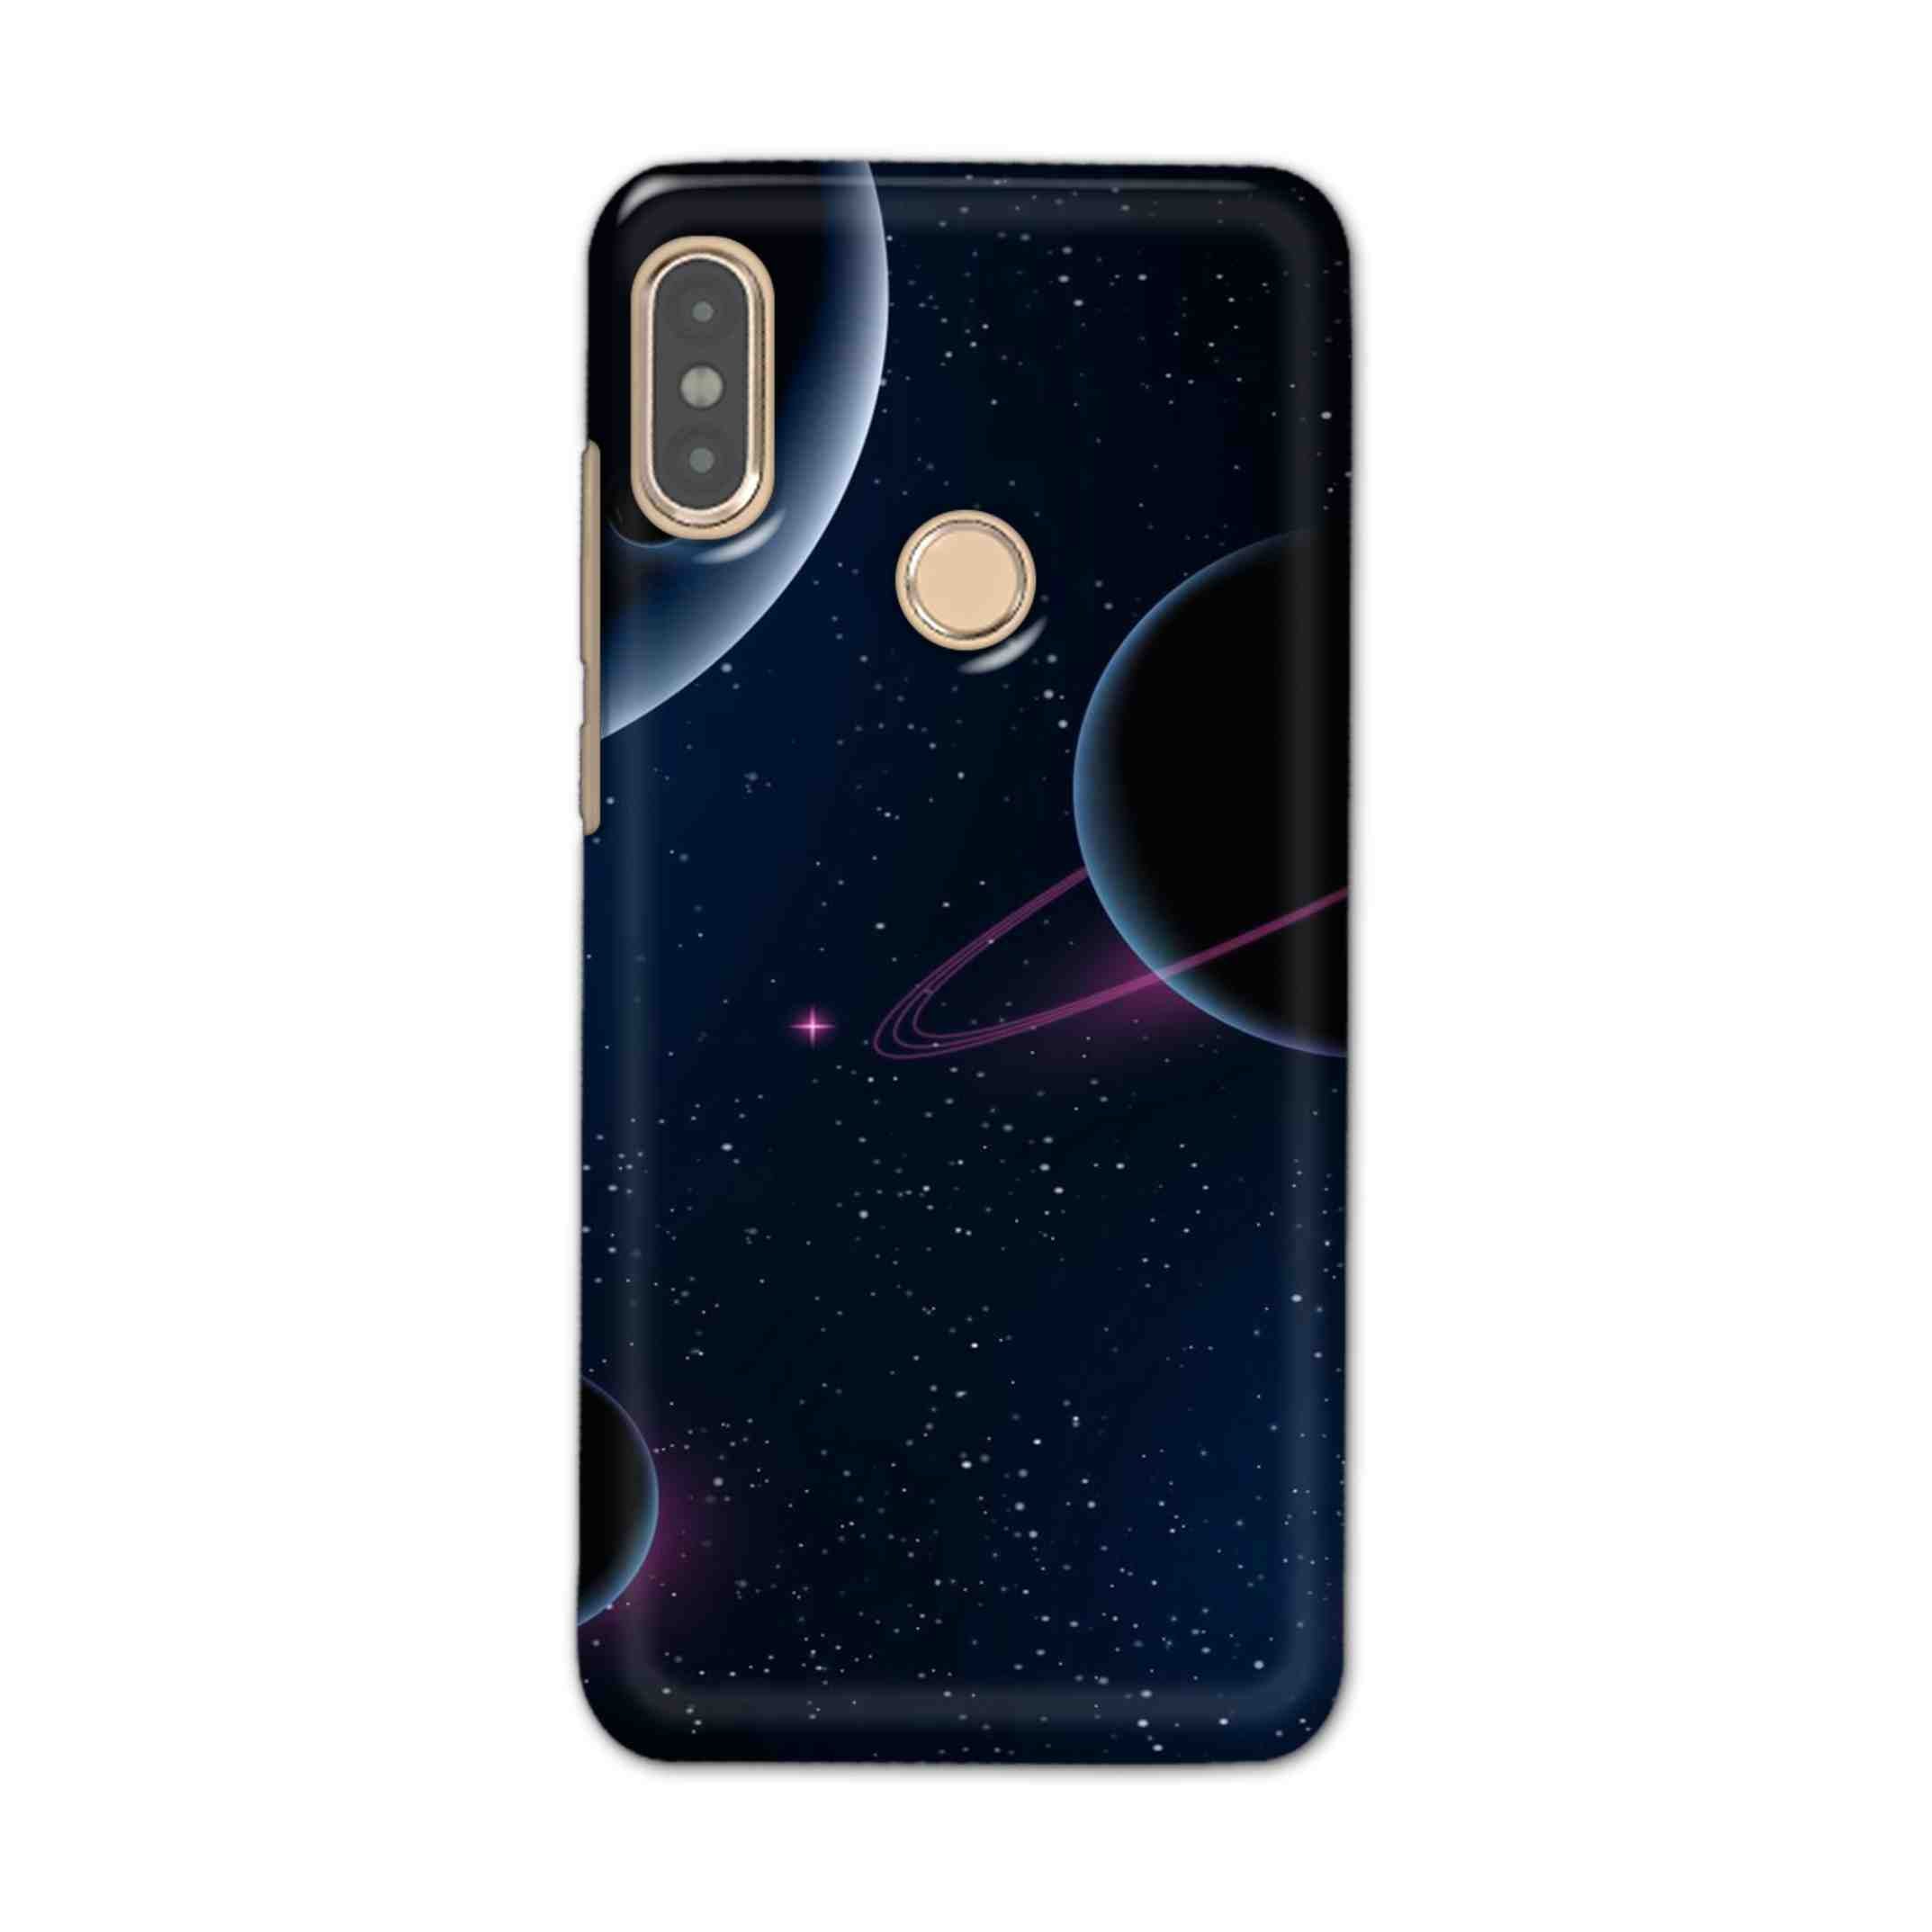 Buy Night Space Hard Back Mobile Phone Case Cover For Xiaomi Redmi Note 5 Pro Online